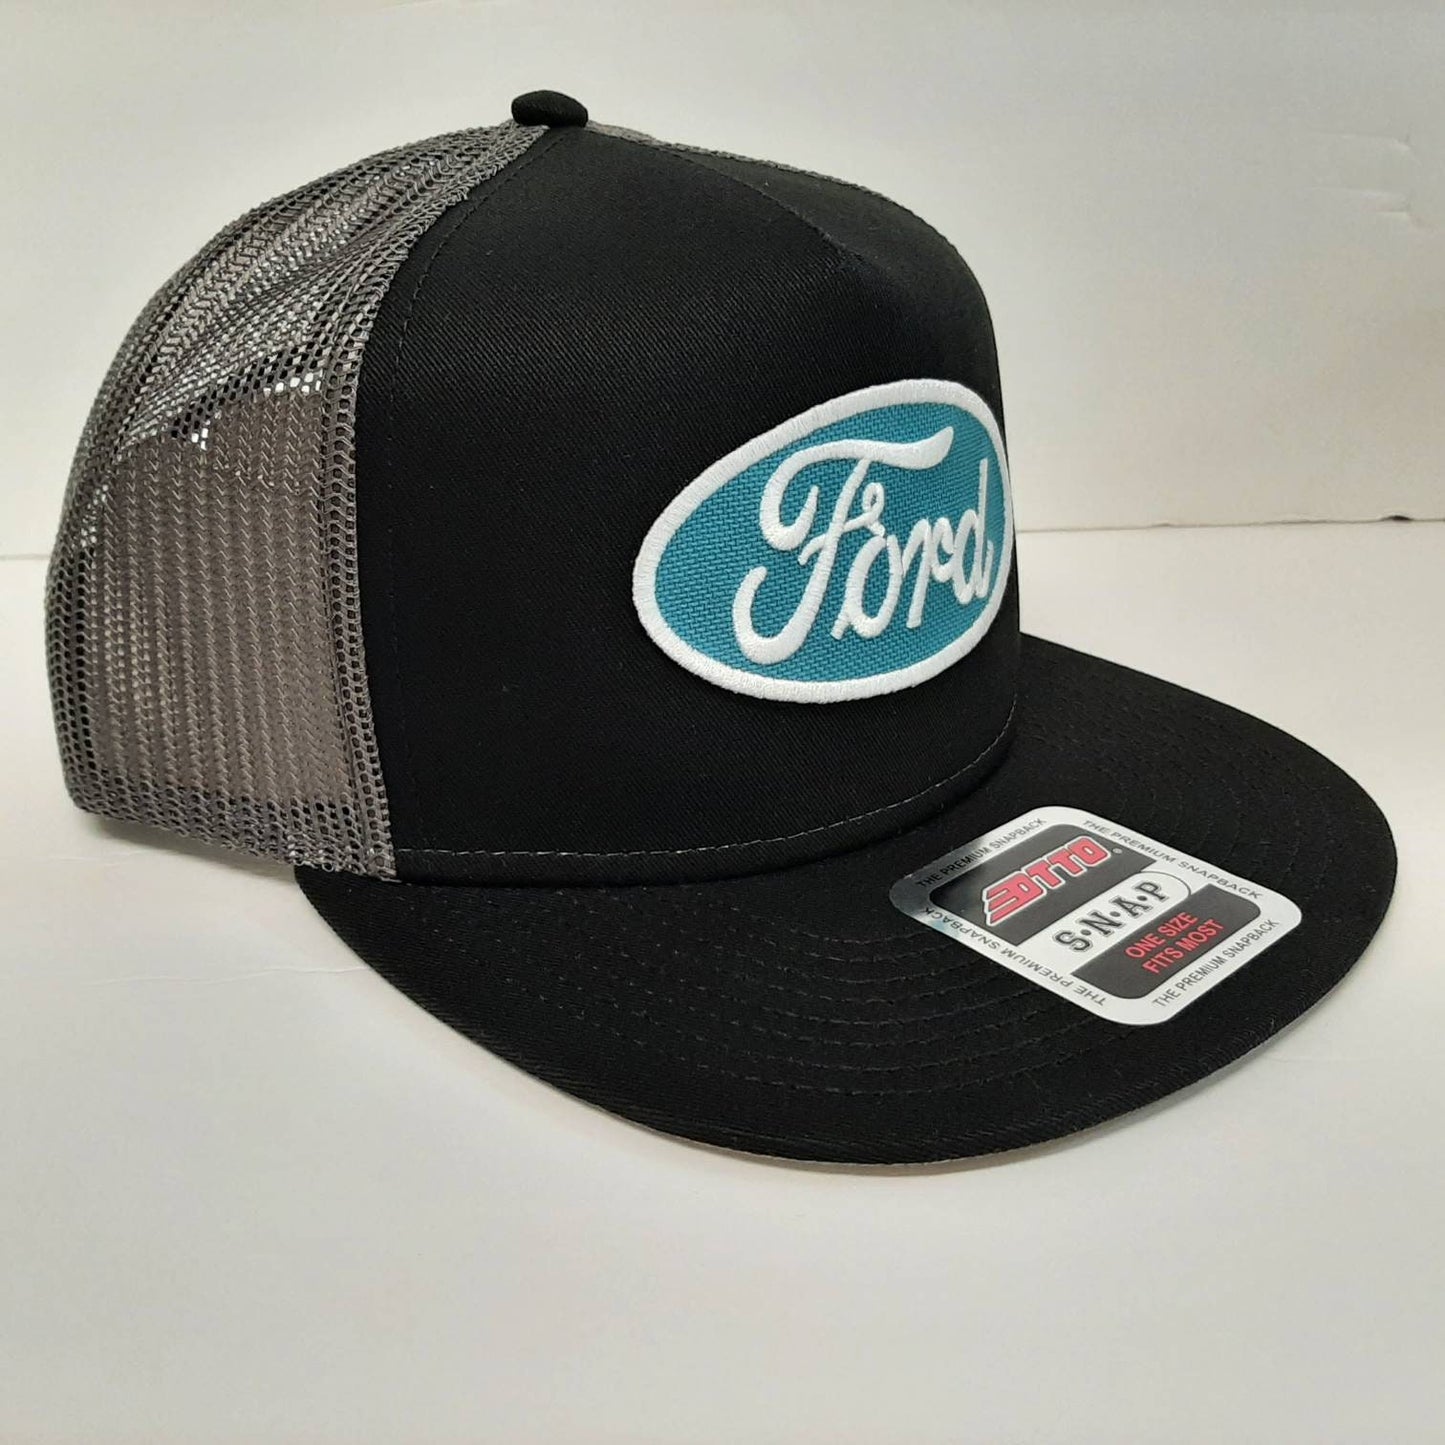 Ford OTTO Flat Bill Baseball Cap Embroidered Patch Snapback Mesh Trucker